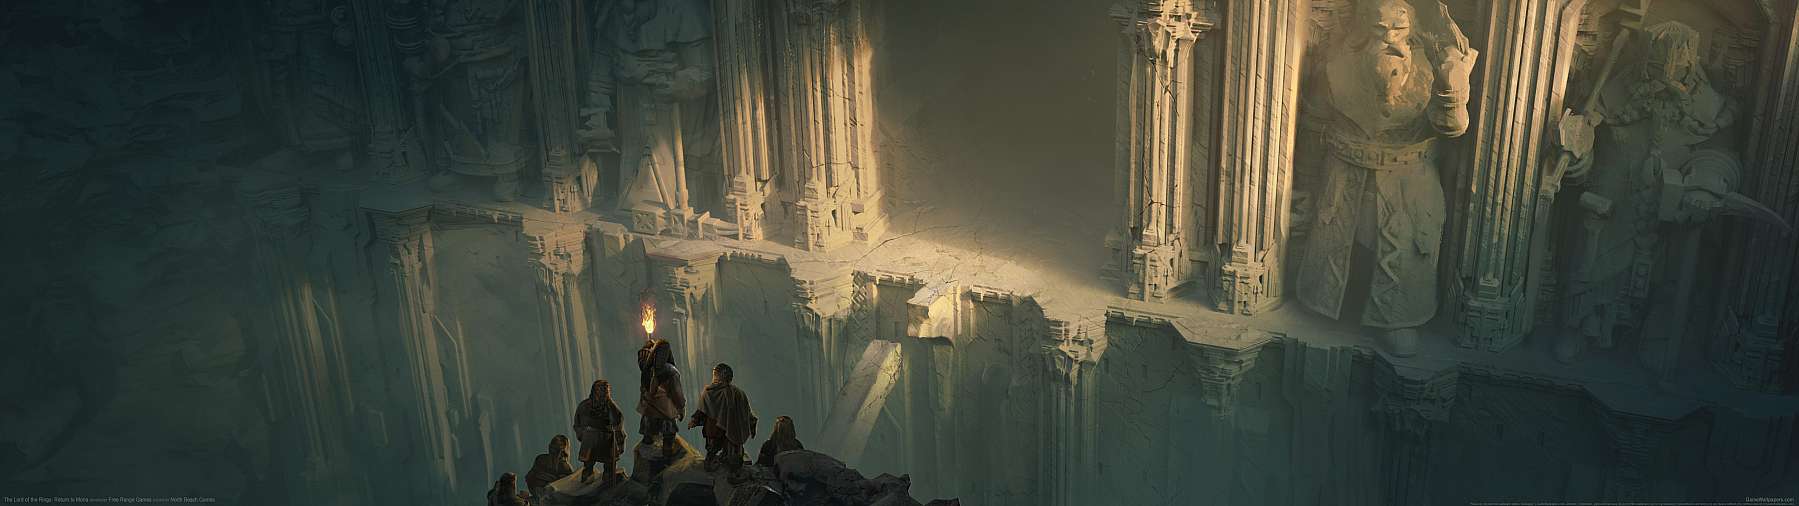 The Lord of the Rings: Return to Moria superwide wallpaper or background 04